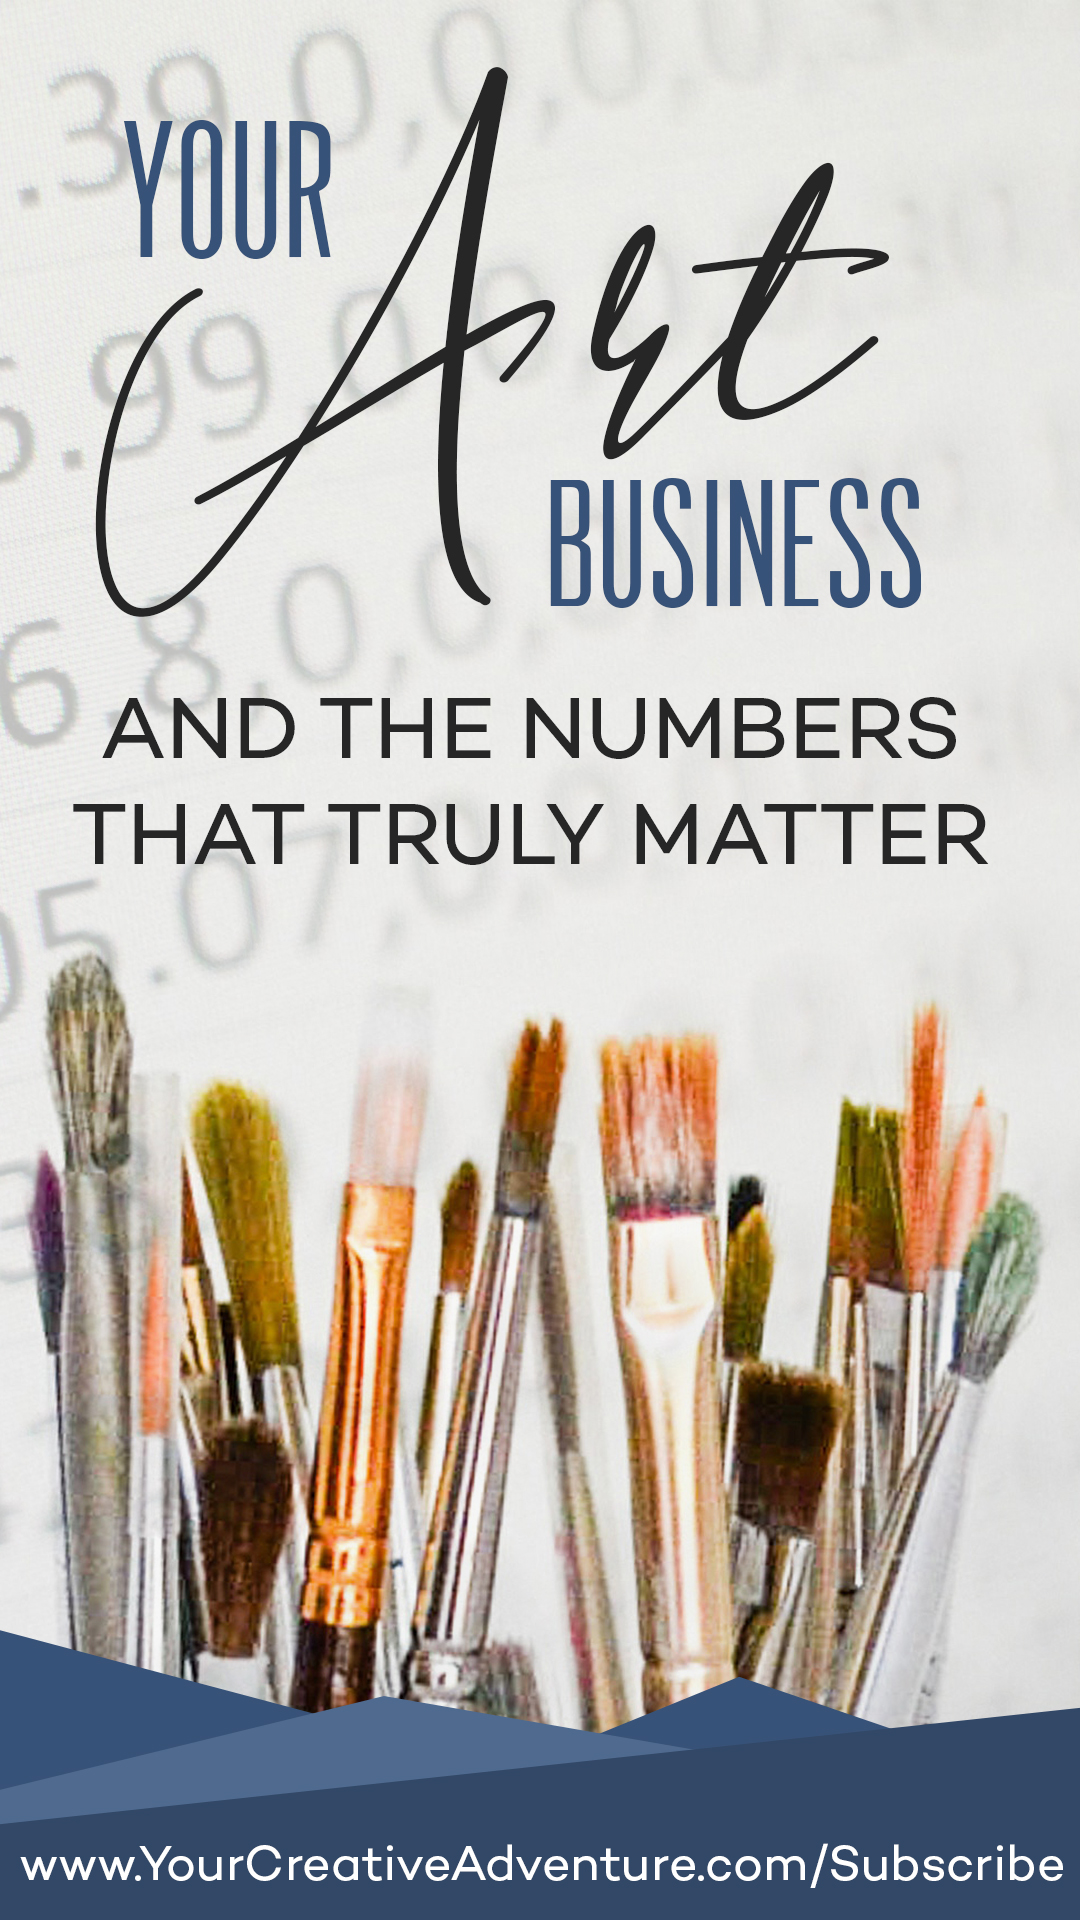 Most of the time, creatives like us shy away from numbers. But numbers are important when it comes to our art business. We need to know the business insights and get familiar with our marketing insights so we can create the best artist business plan. Hold on to your seats because today, we will learn the numbers that truly matter in our art business.